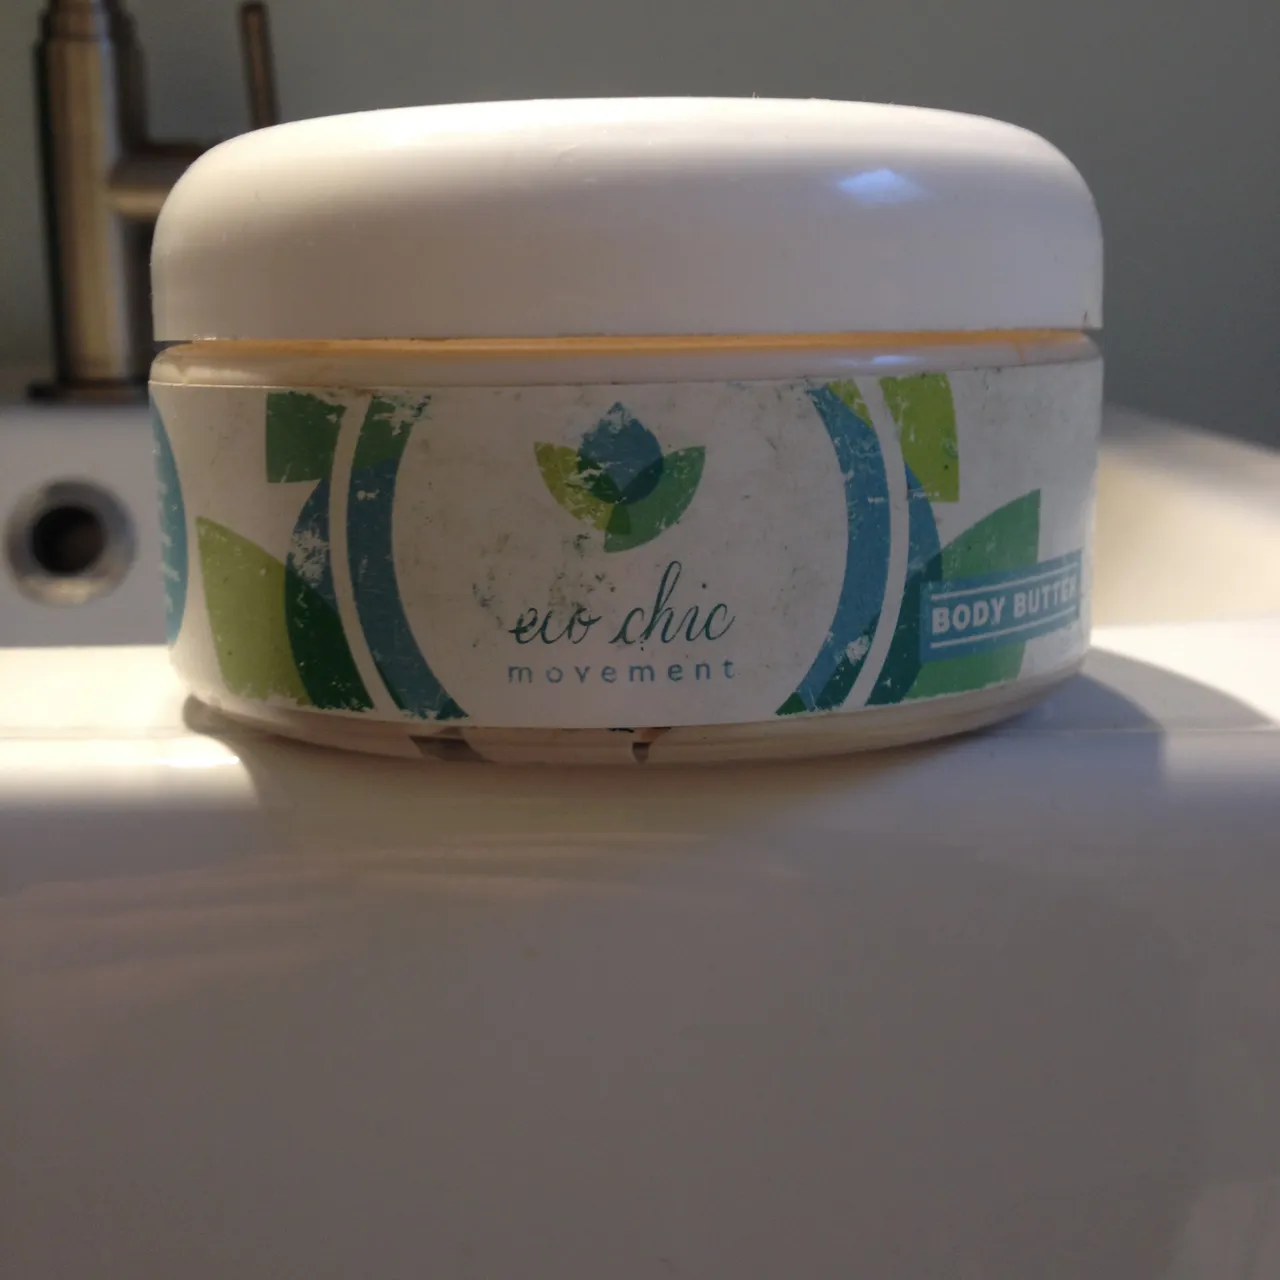 Eco chic body butter photo 1